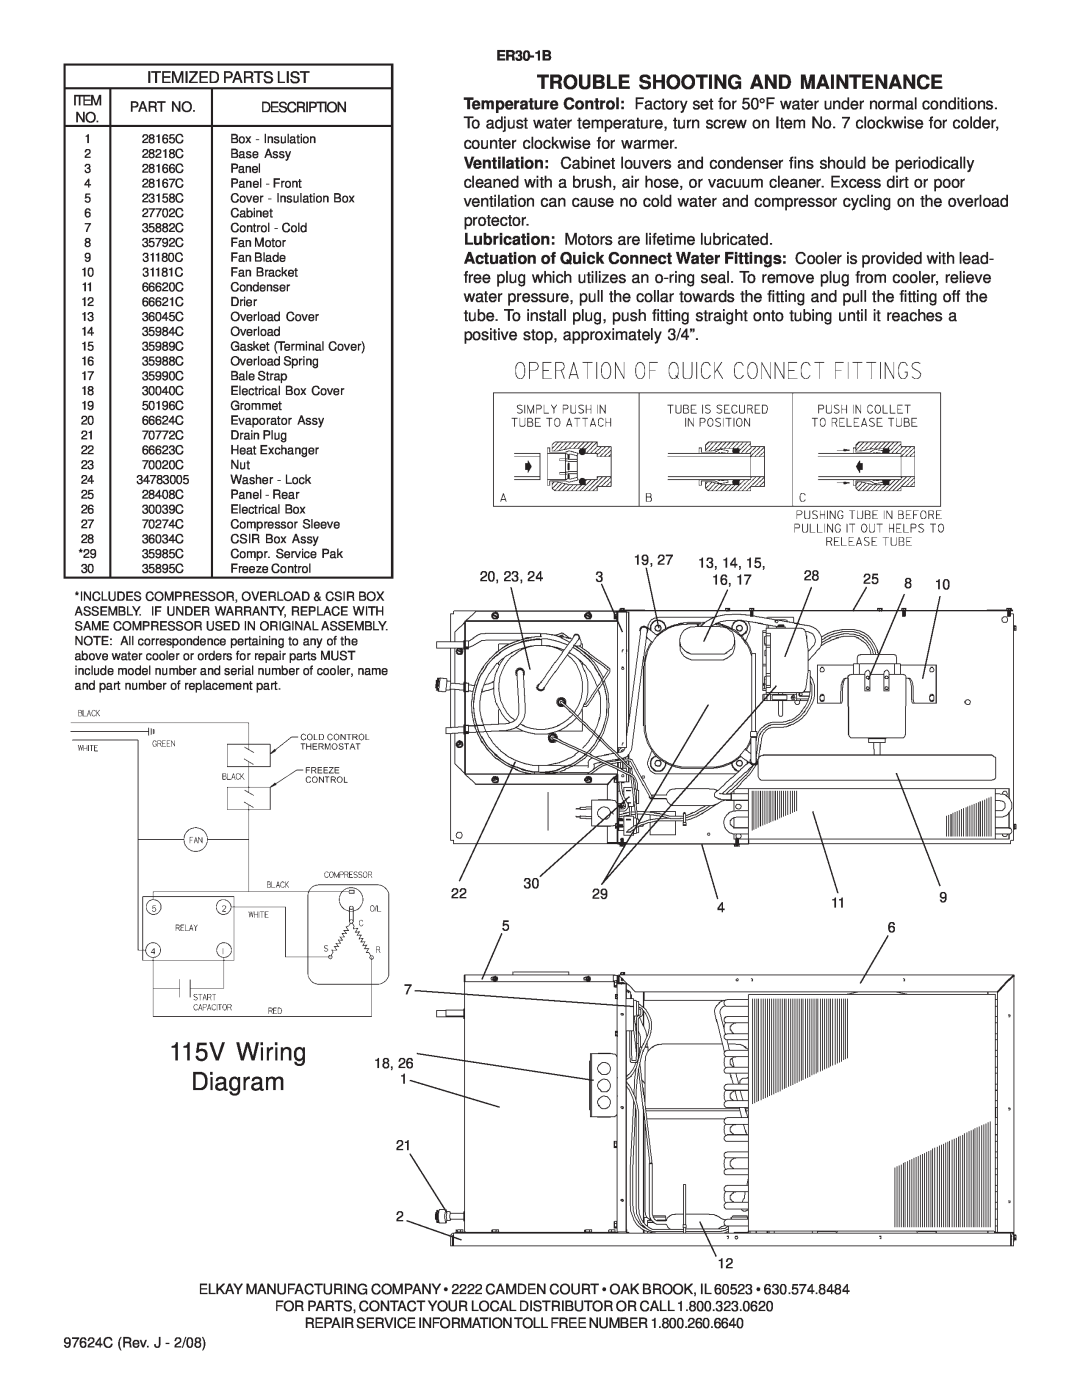 Elkay ER30-1B installation instructions Trouble Shooting And Maintenance, 115V Wiring Diagram 